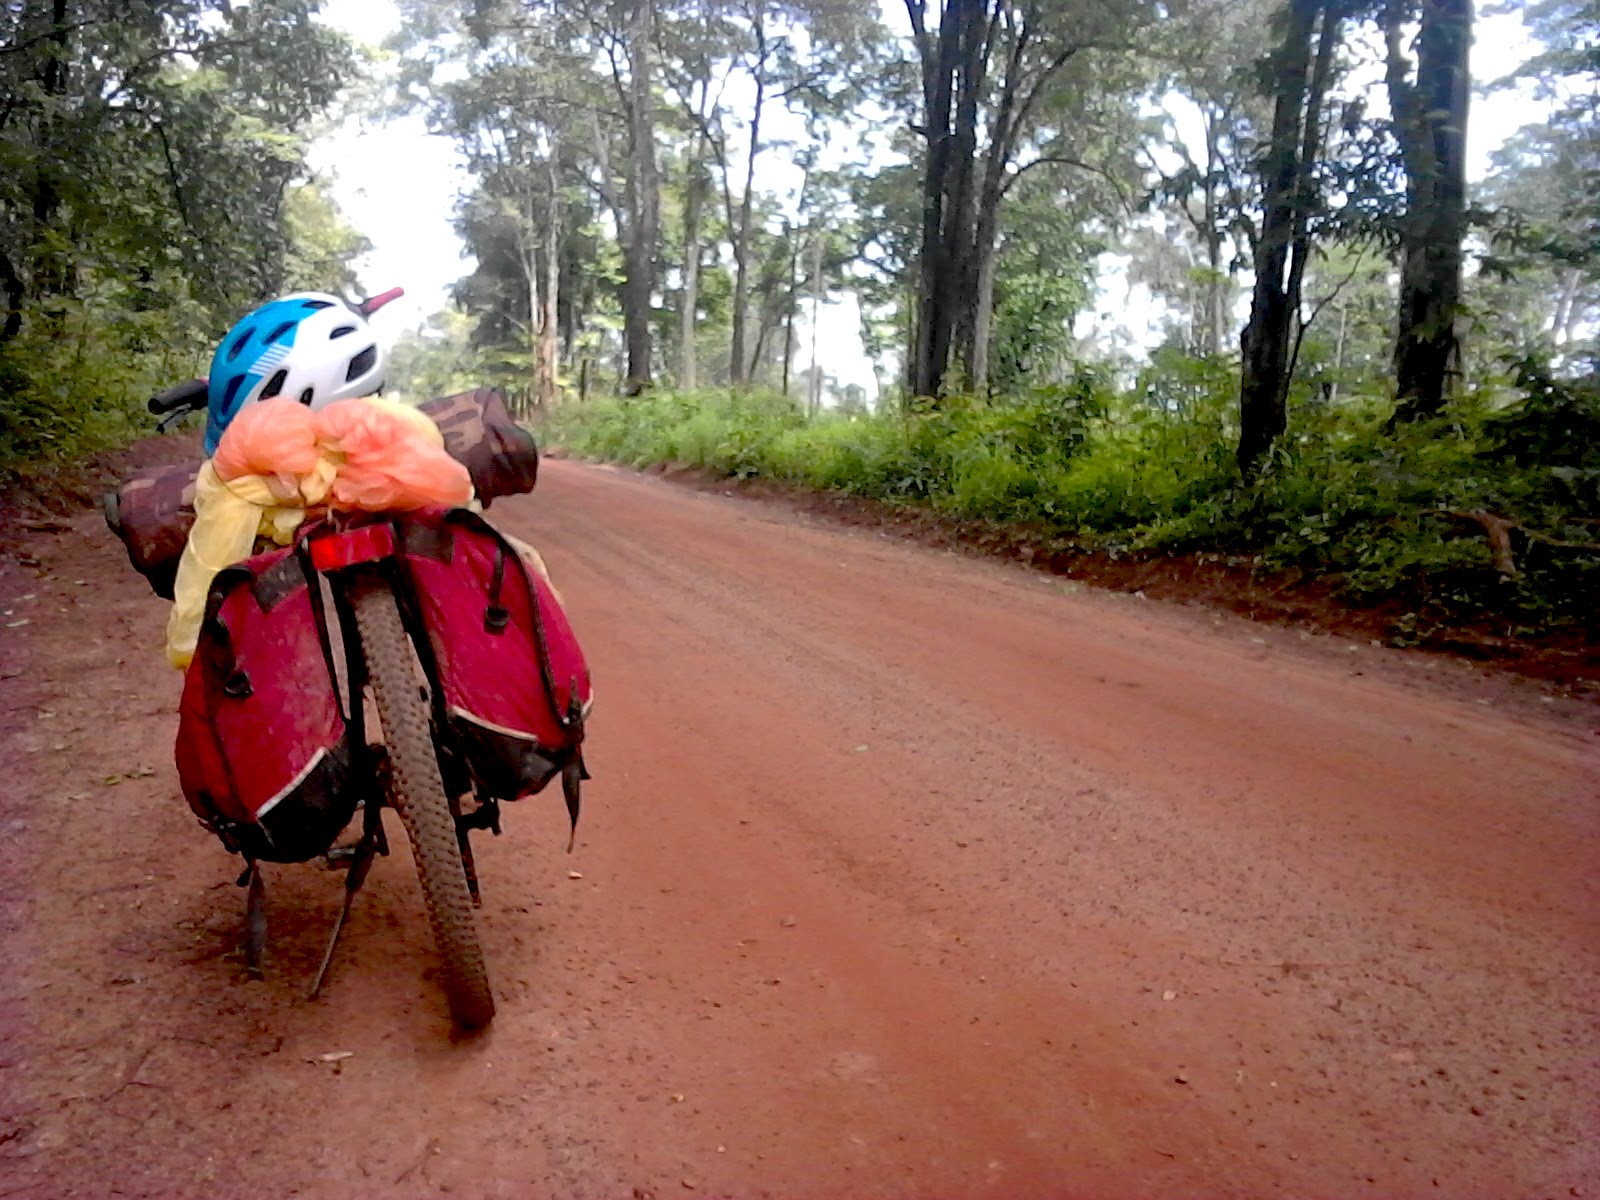 Dirt road through the jungle near Stung Treng, Cambodia, Into Foreign Lands